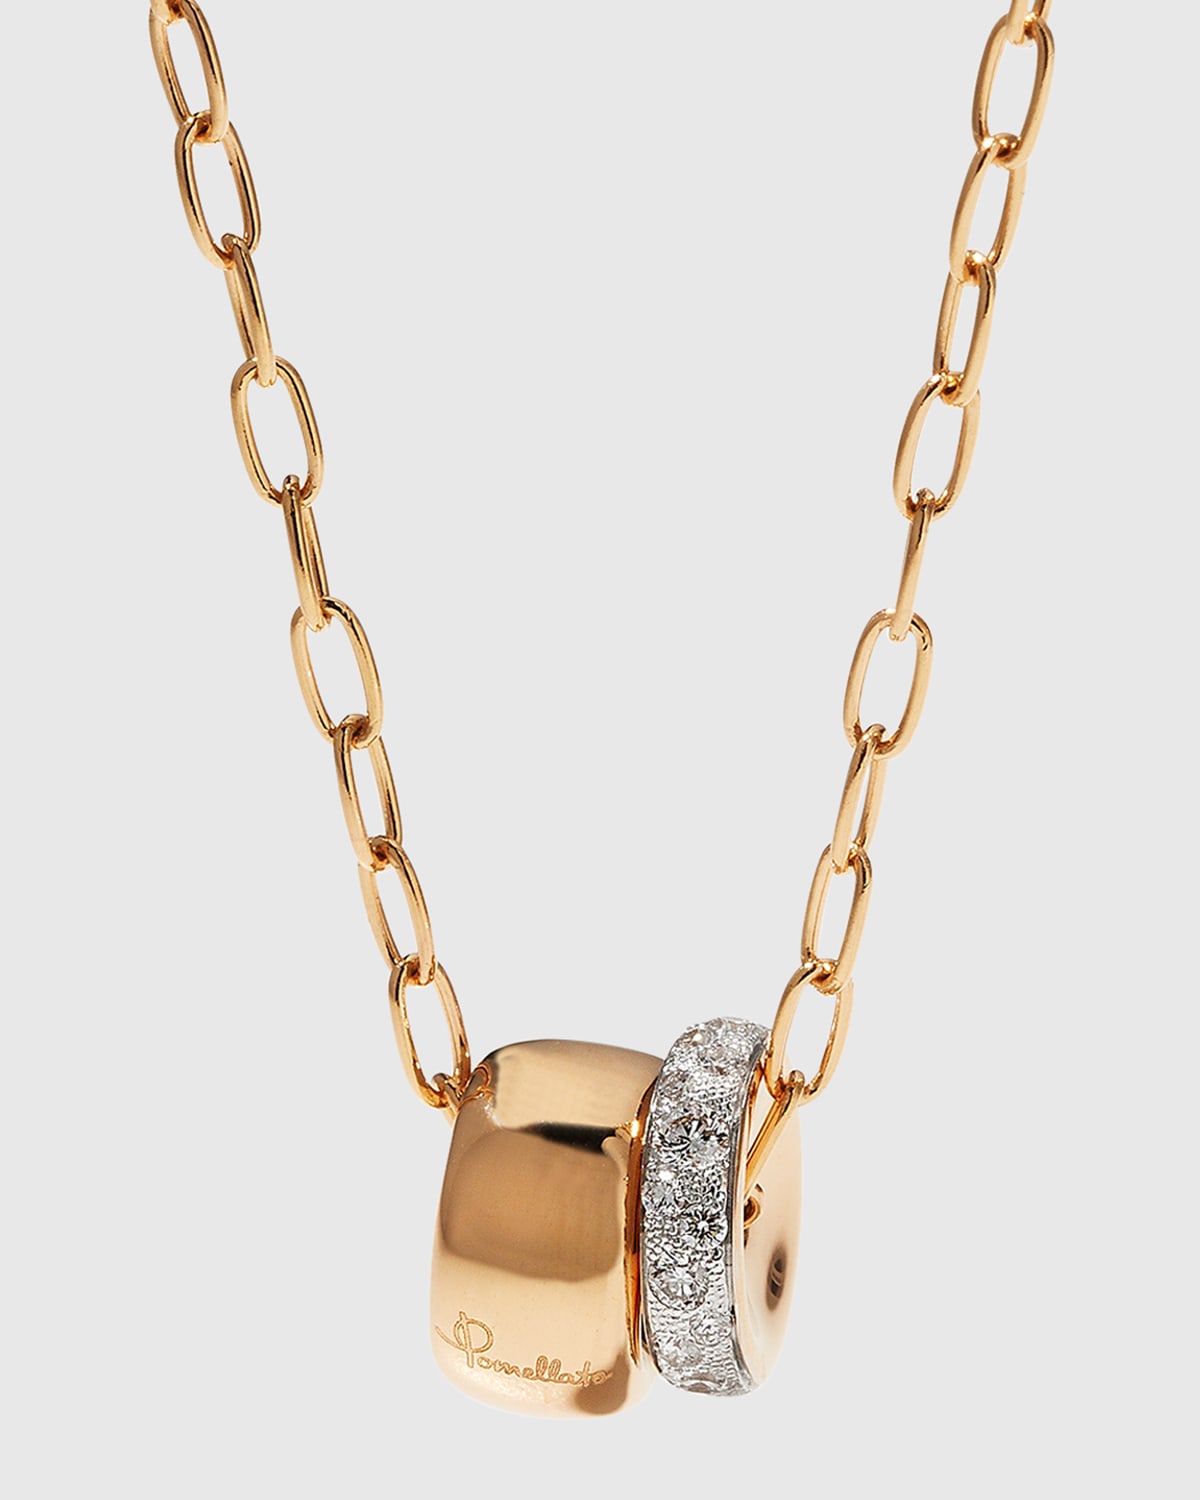 Iconica 18K Rose Gold Pendant Necklace